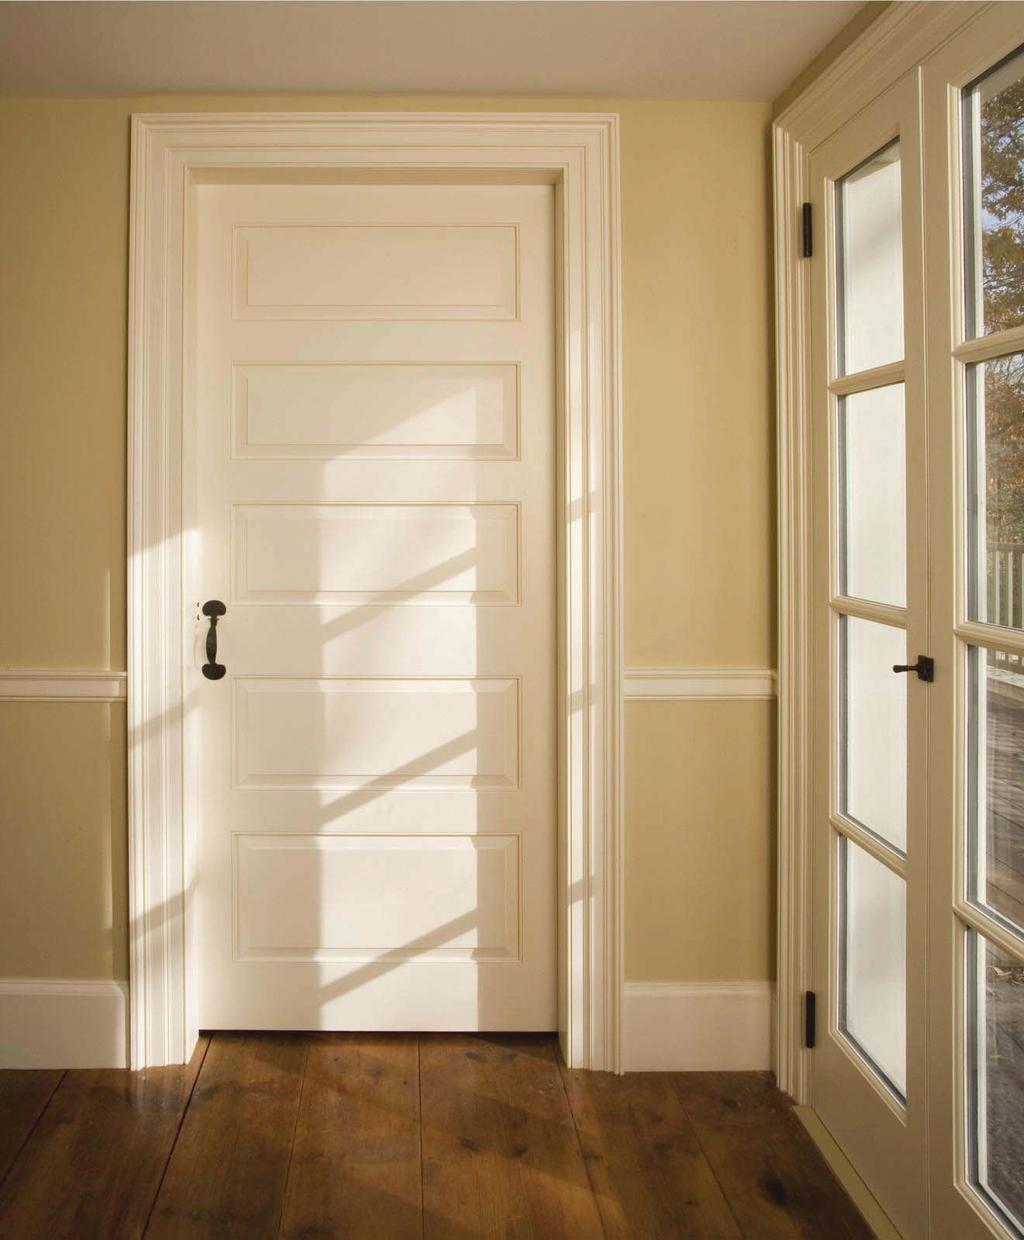 INTERIOR DOORS Our interior doors are built with the finest materials and attention to detail. Several traditional sticking and panel profiles are available.